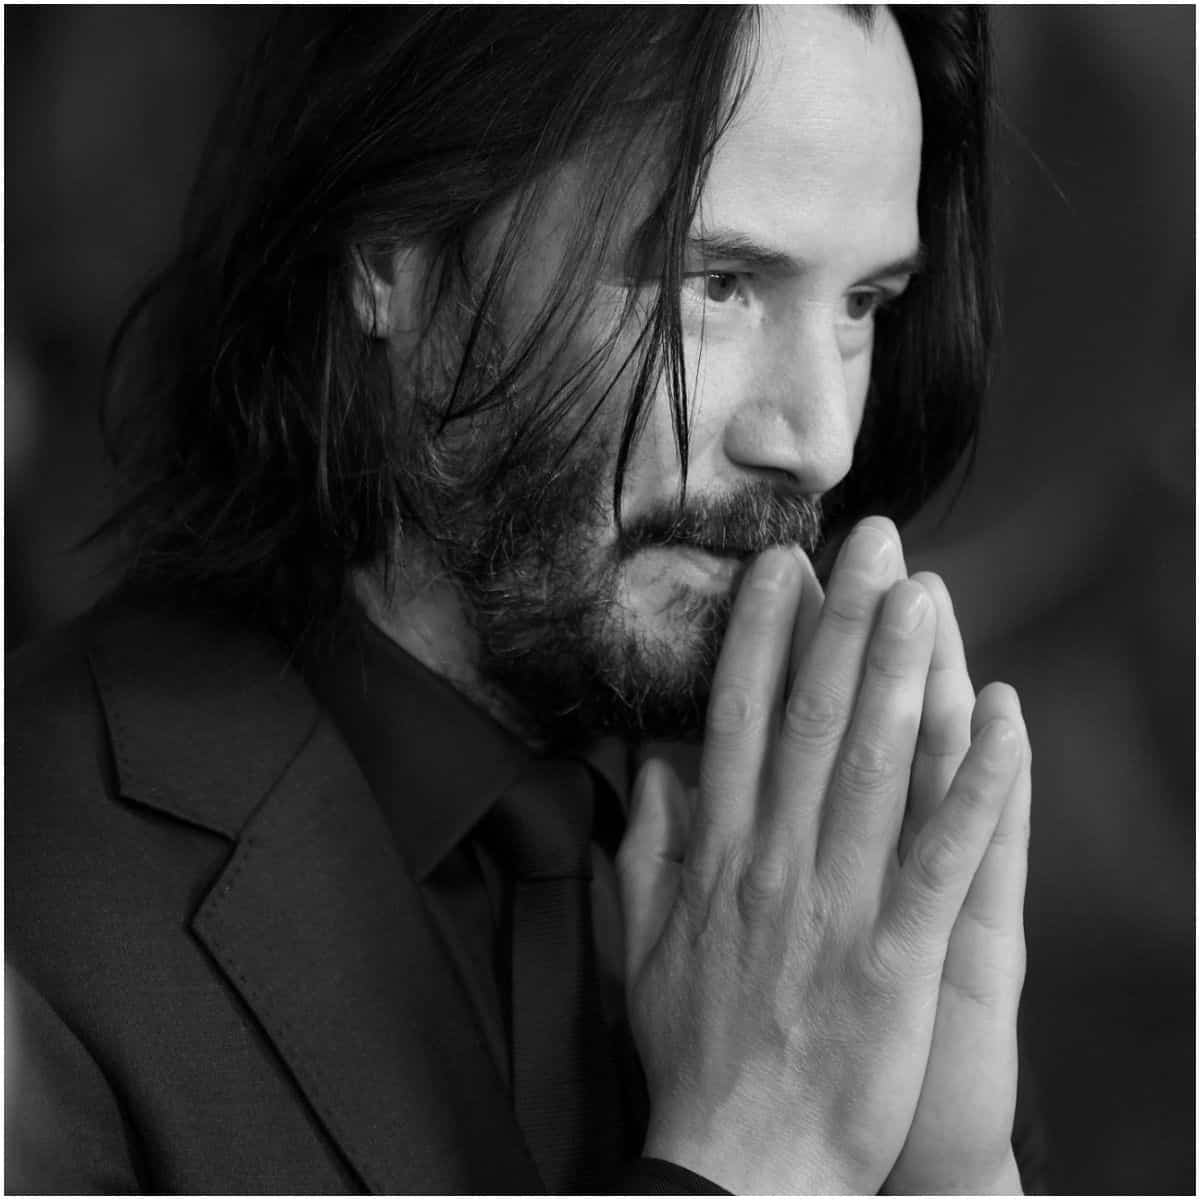 what is Keanu Reeves' religion